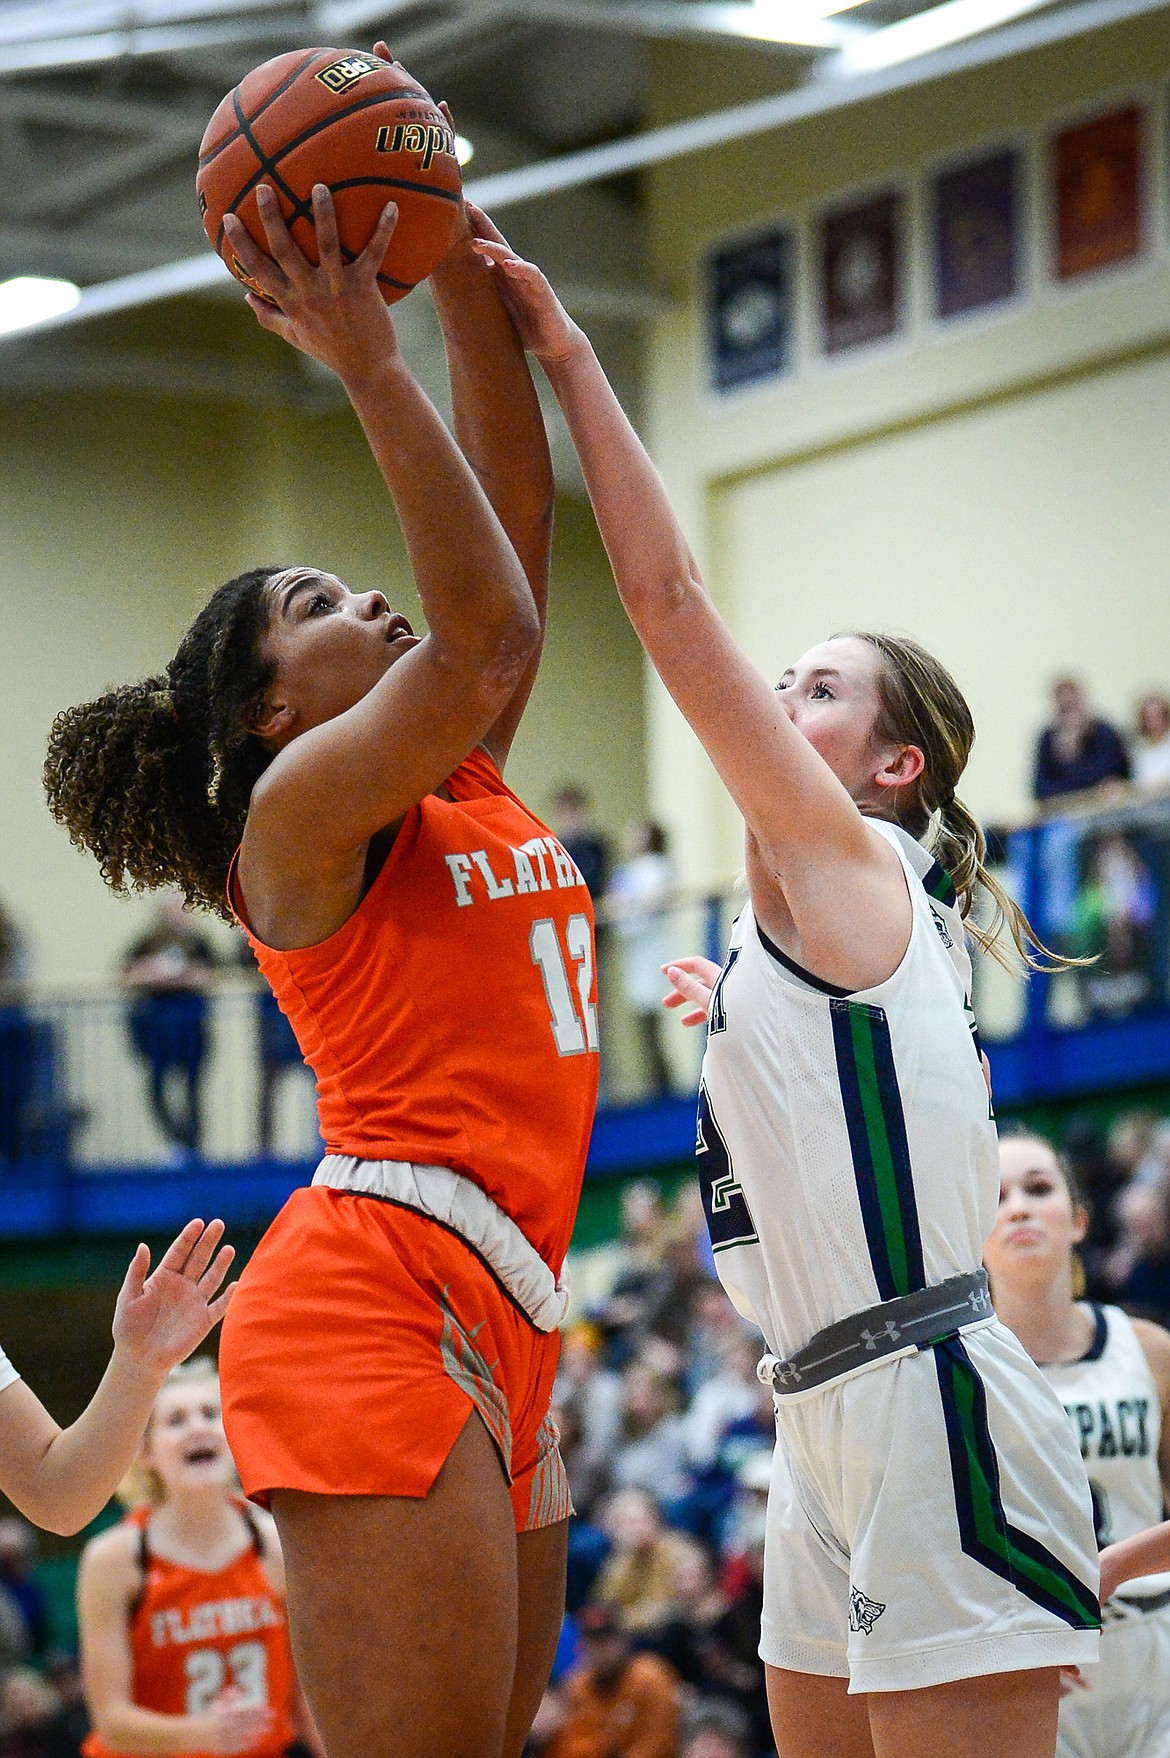 Flathead's Akilah Kubi (12) looks to shoot with Glacier's Sarah Downs (2) defending in the second half during crosstown basketball at Glacier High School on Friday, Jan. 20. (Casey Kreider/Daily Inter Lake)